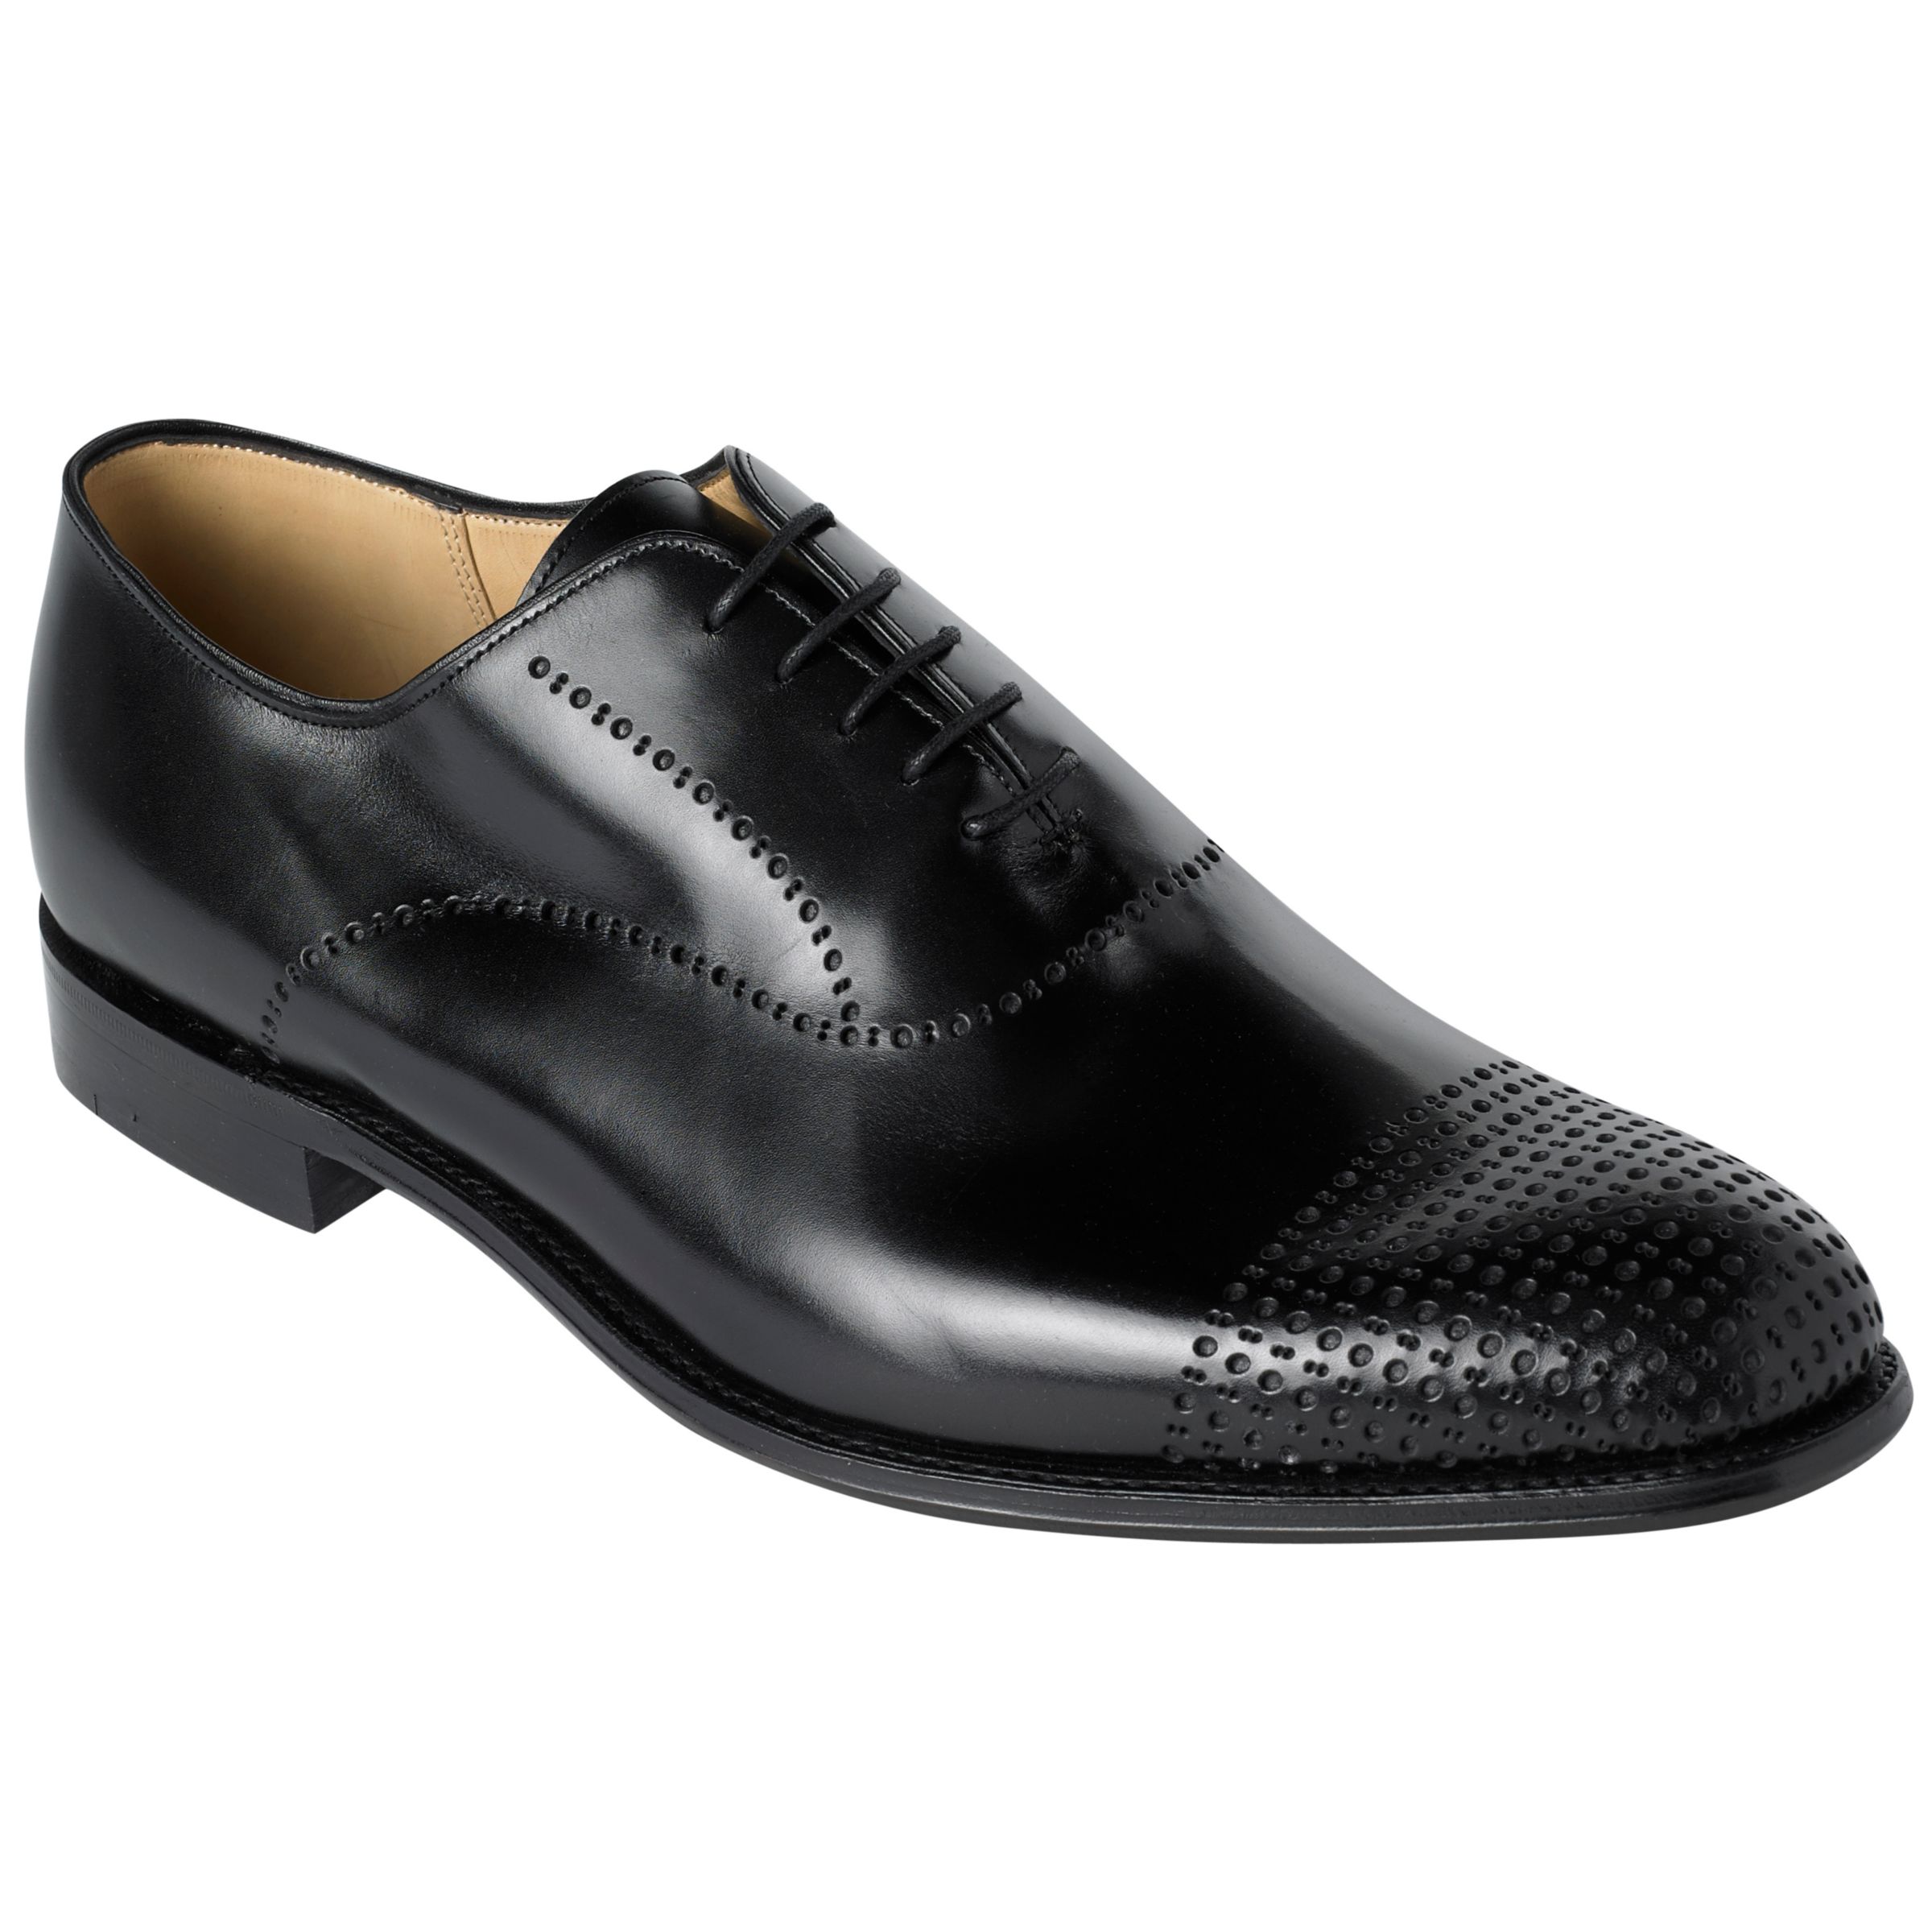 Joe Casely-Hayford for John Lewis Mentor Punched Oxford Shoes, Black at JohnLewis